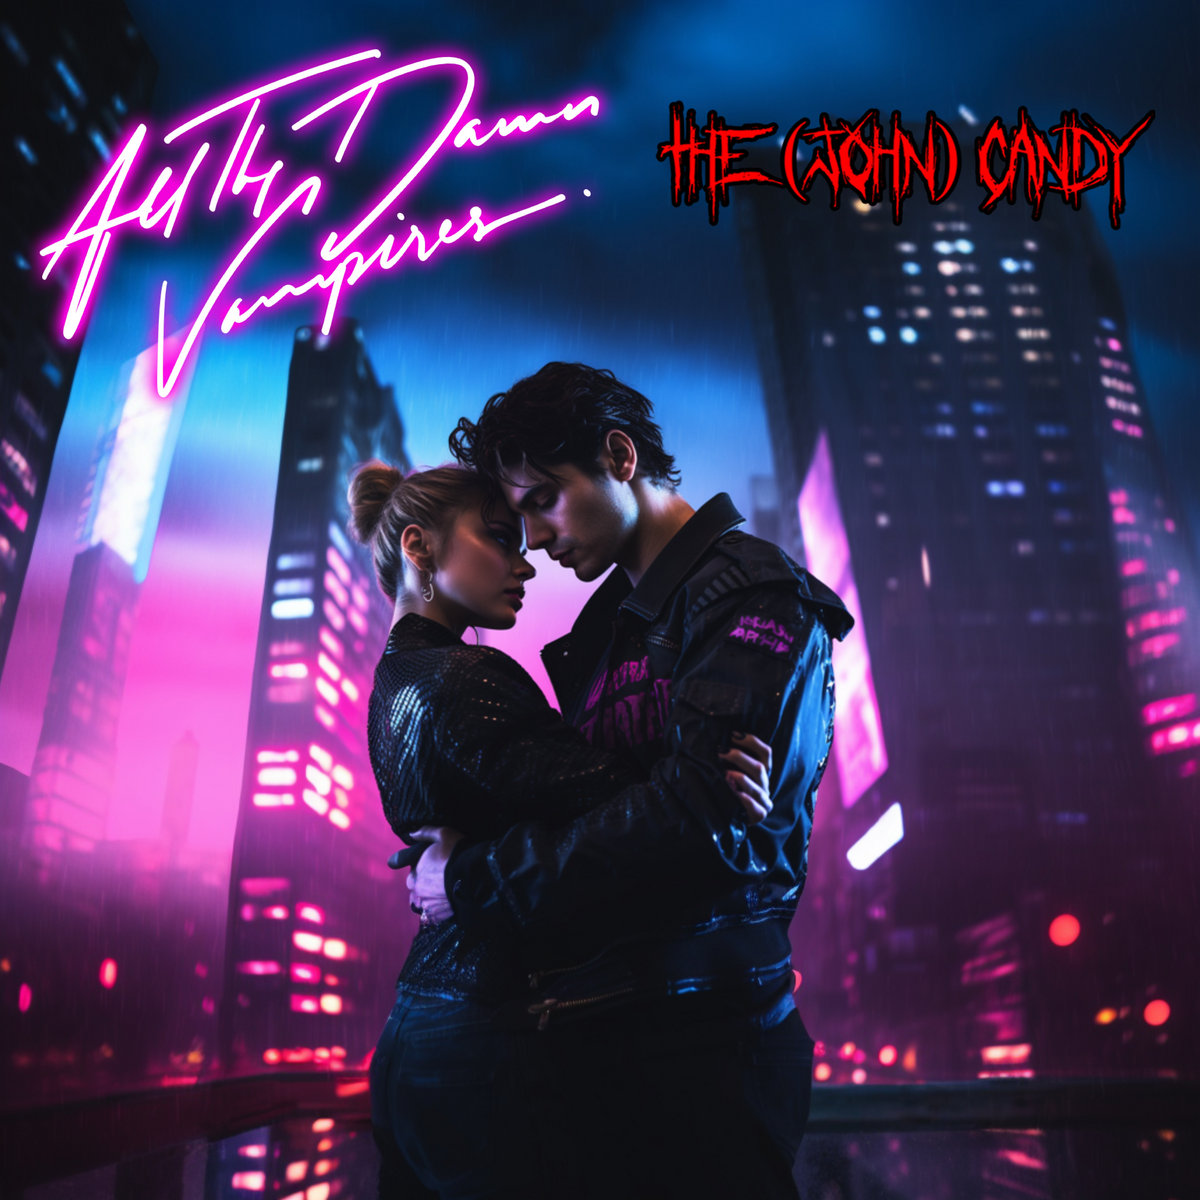 HOT TRACK: “Kiss Me to the Deftones” by All the Damn Vampires and The John Candy